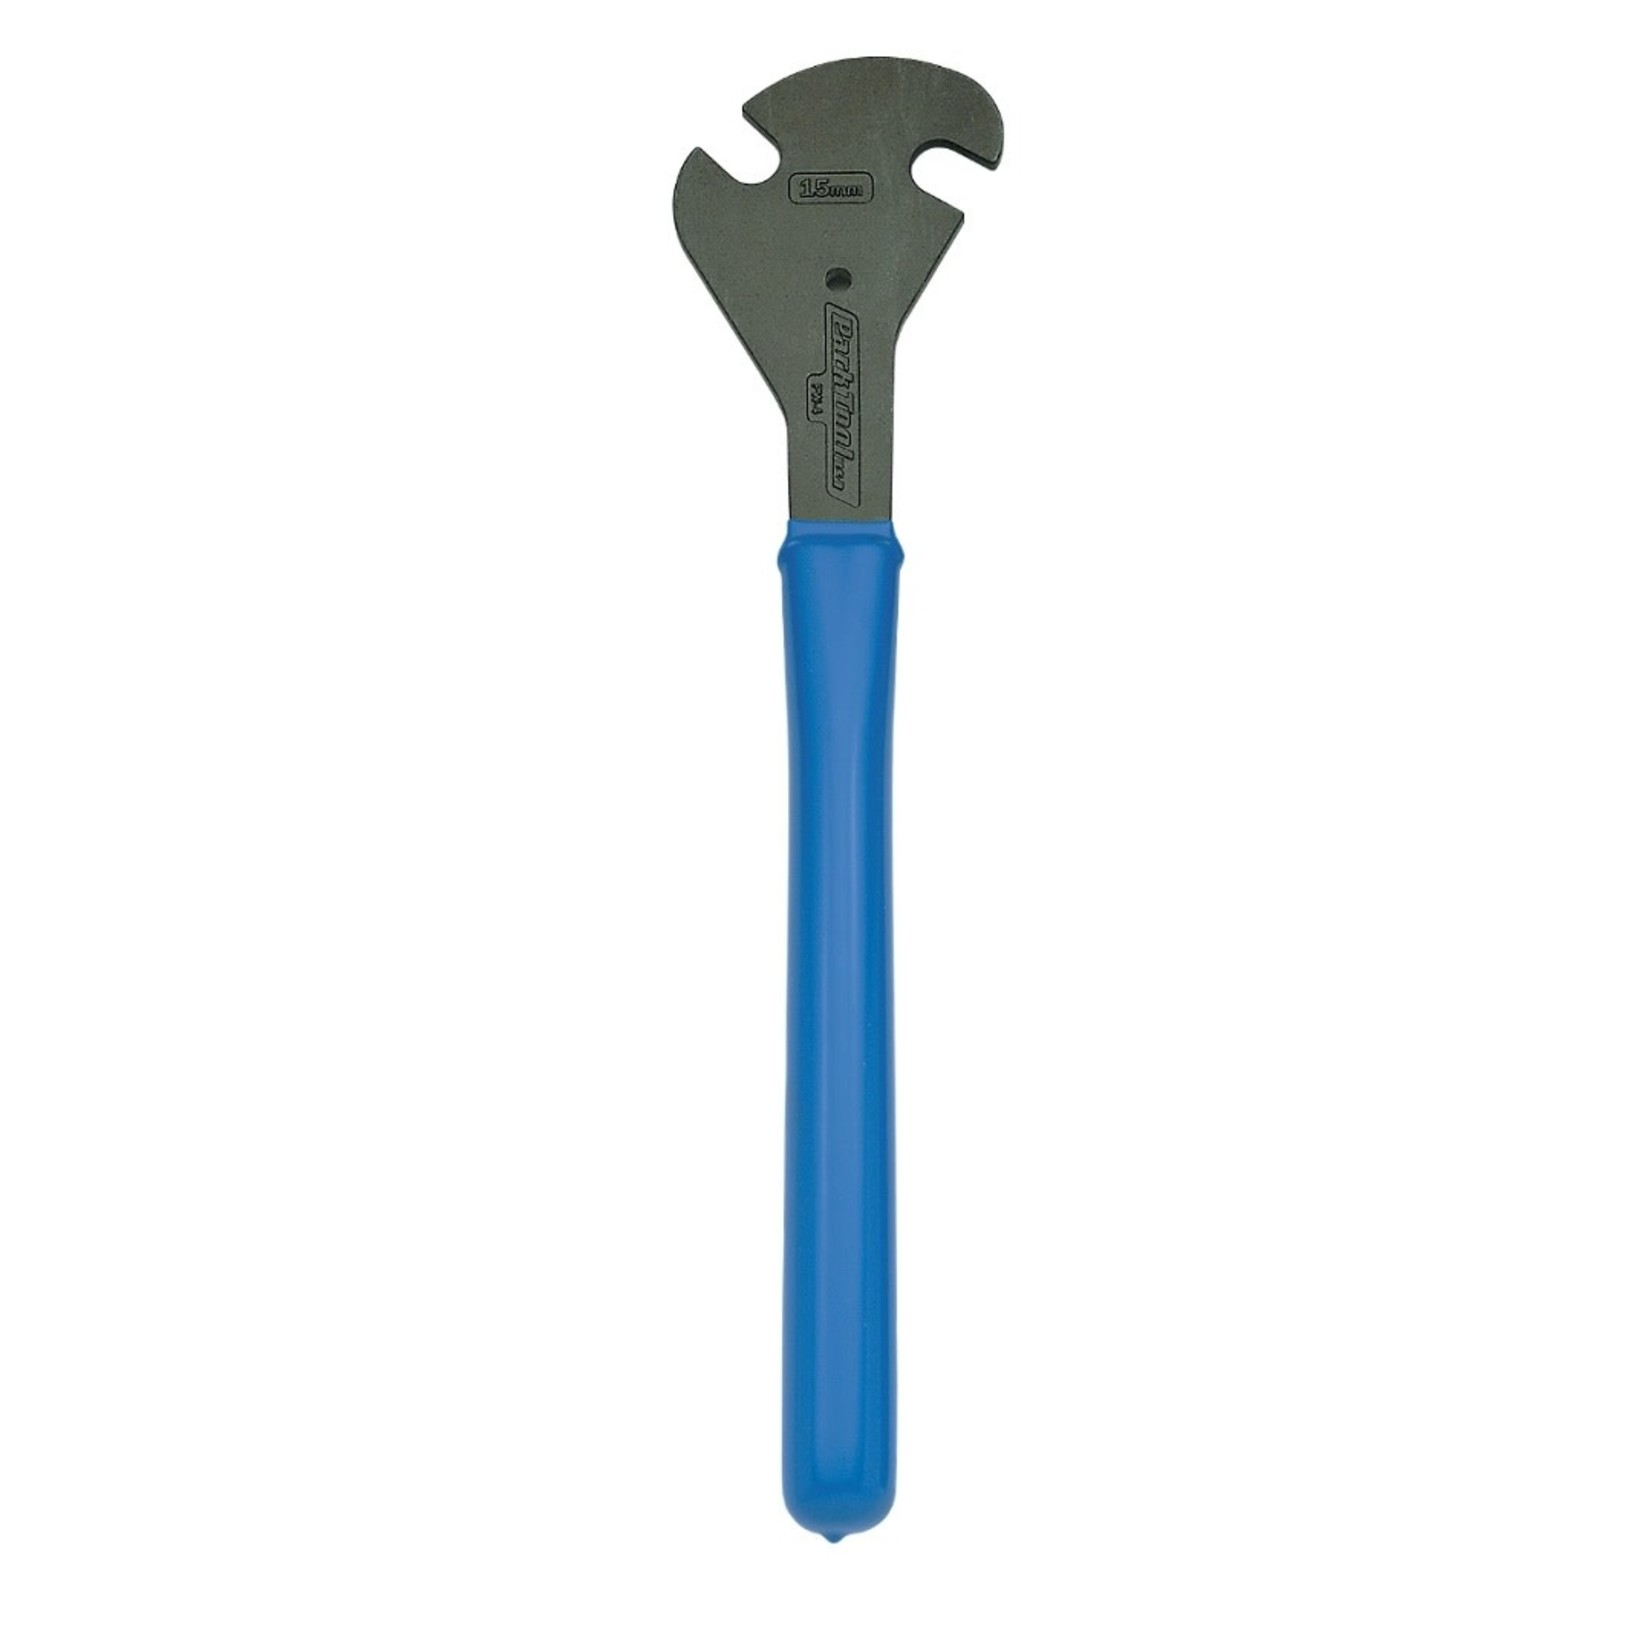 PARK TOOL Park Tool Pro Pedal Wrench PW-4